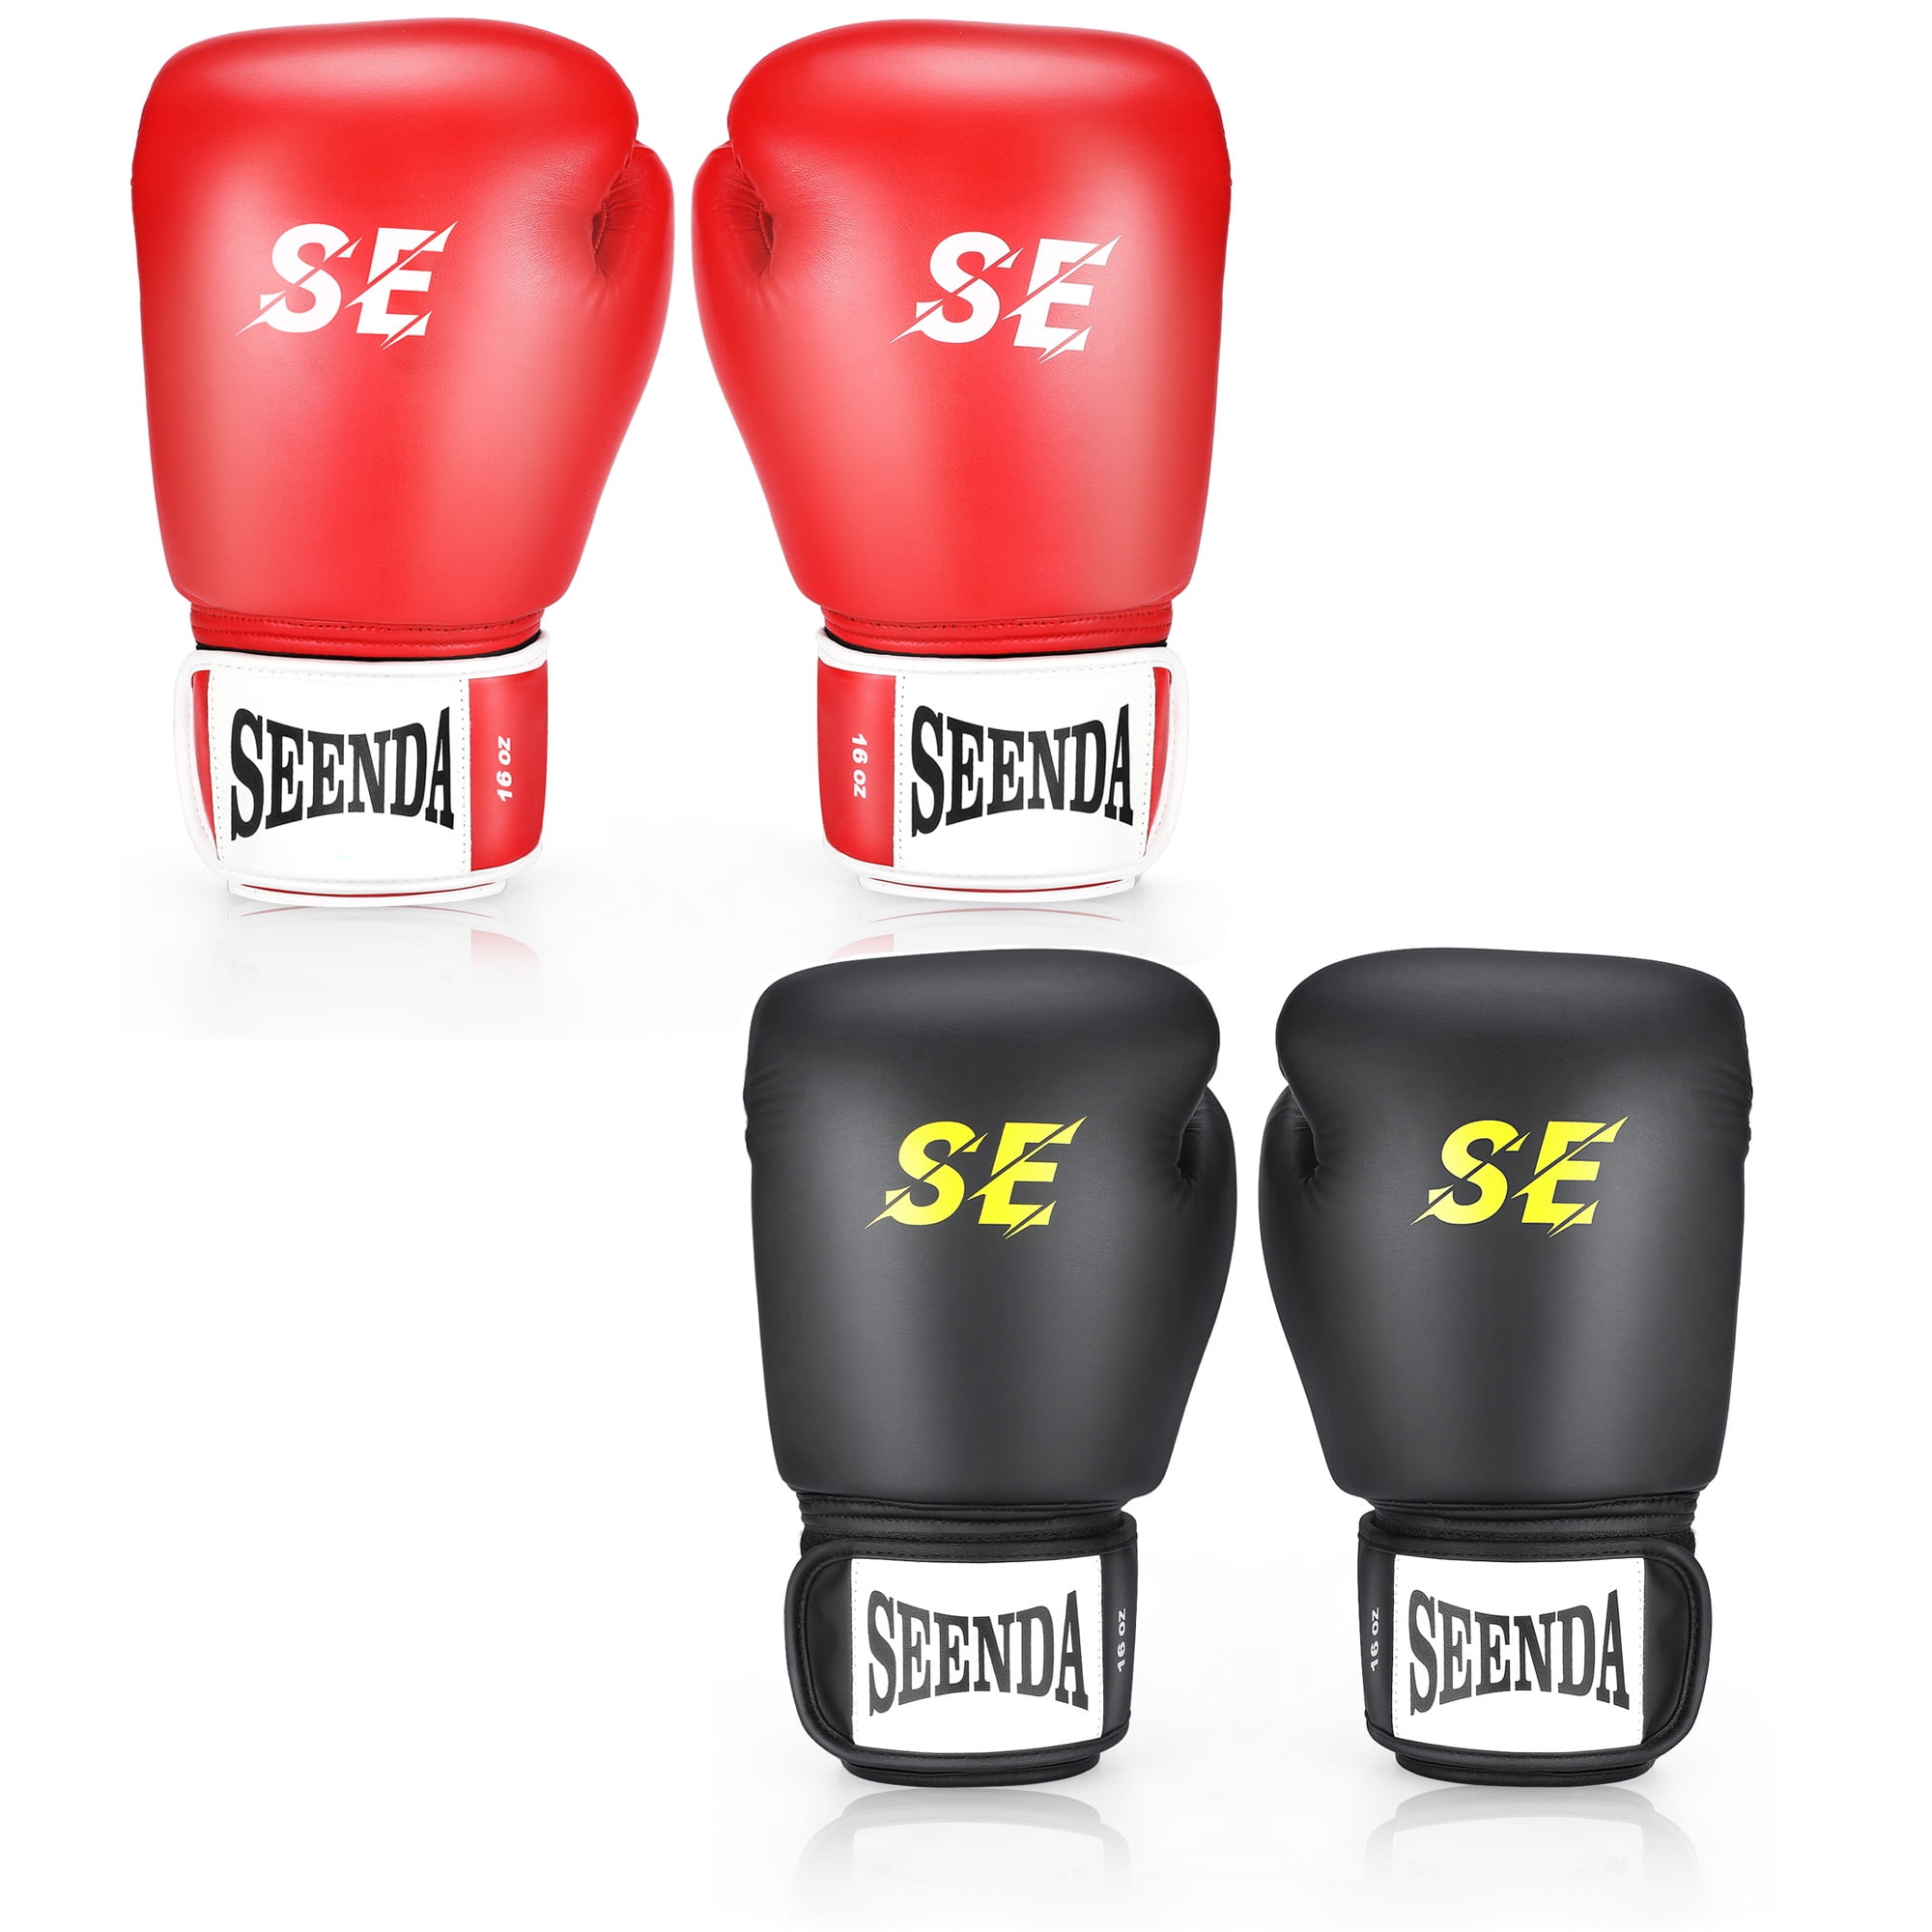 VELO Boxing Gloves MMA Bag Punch Training Mitts Sparring Muay Thai Glove Pro 